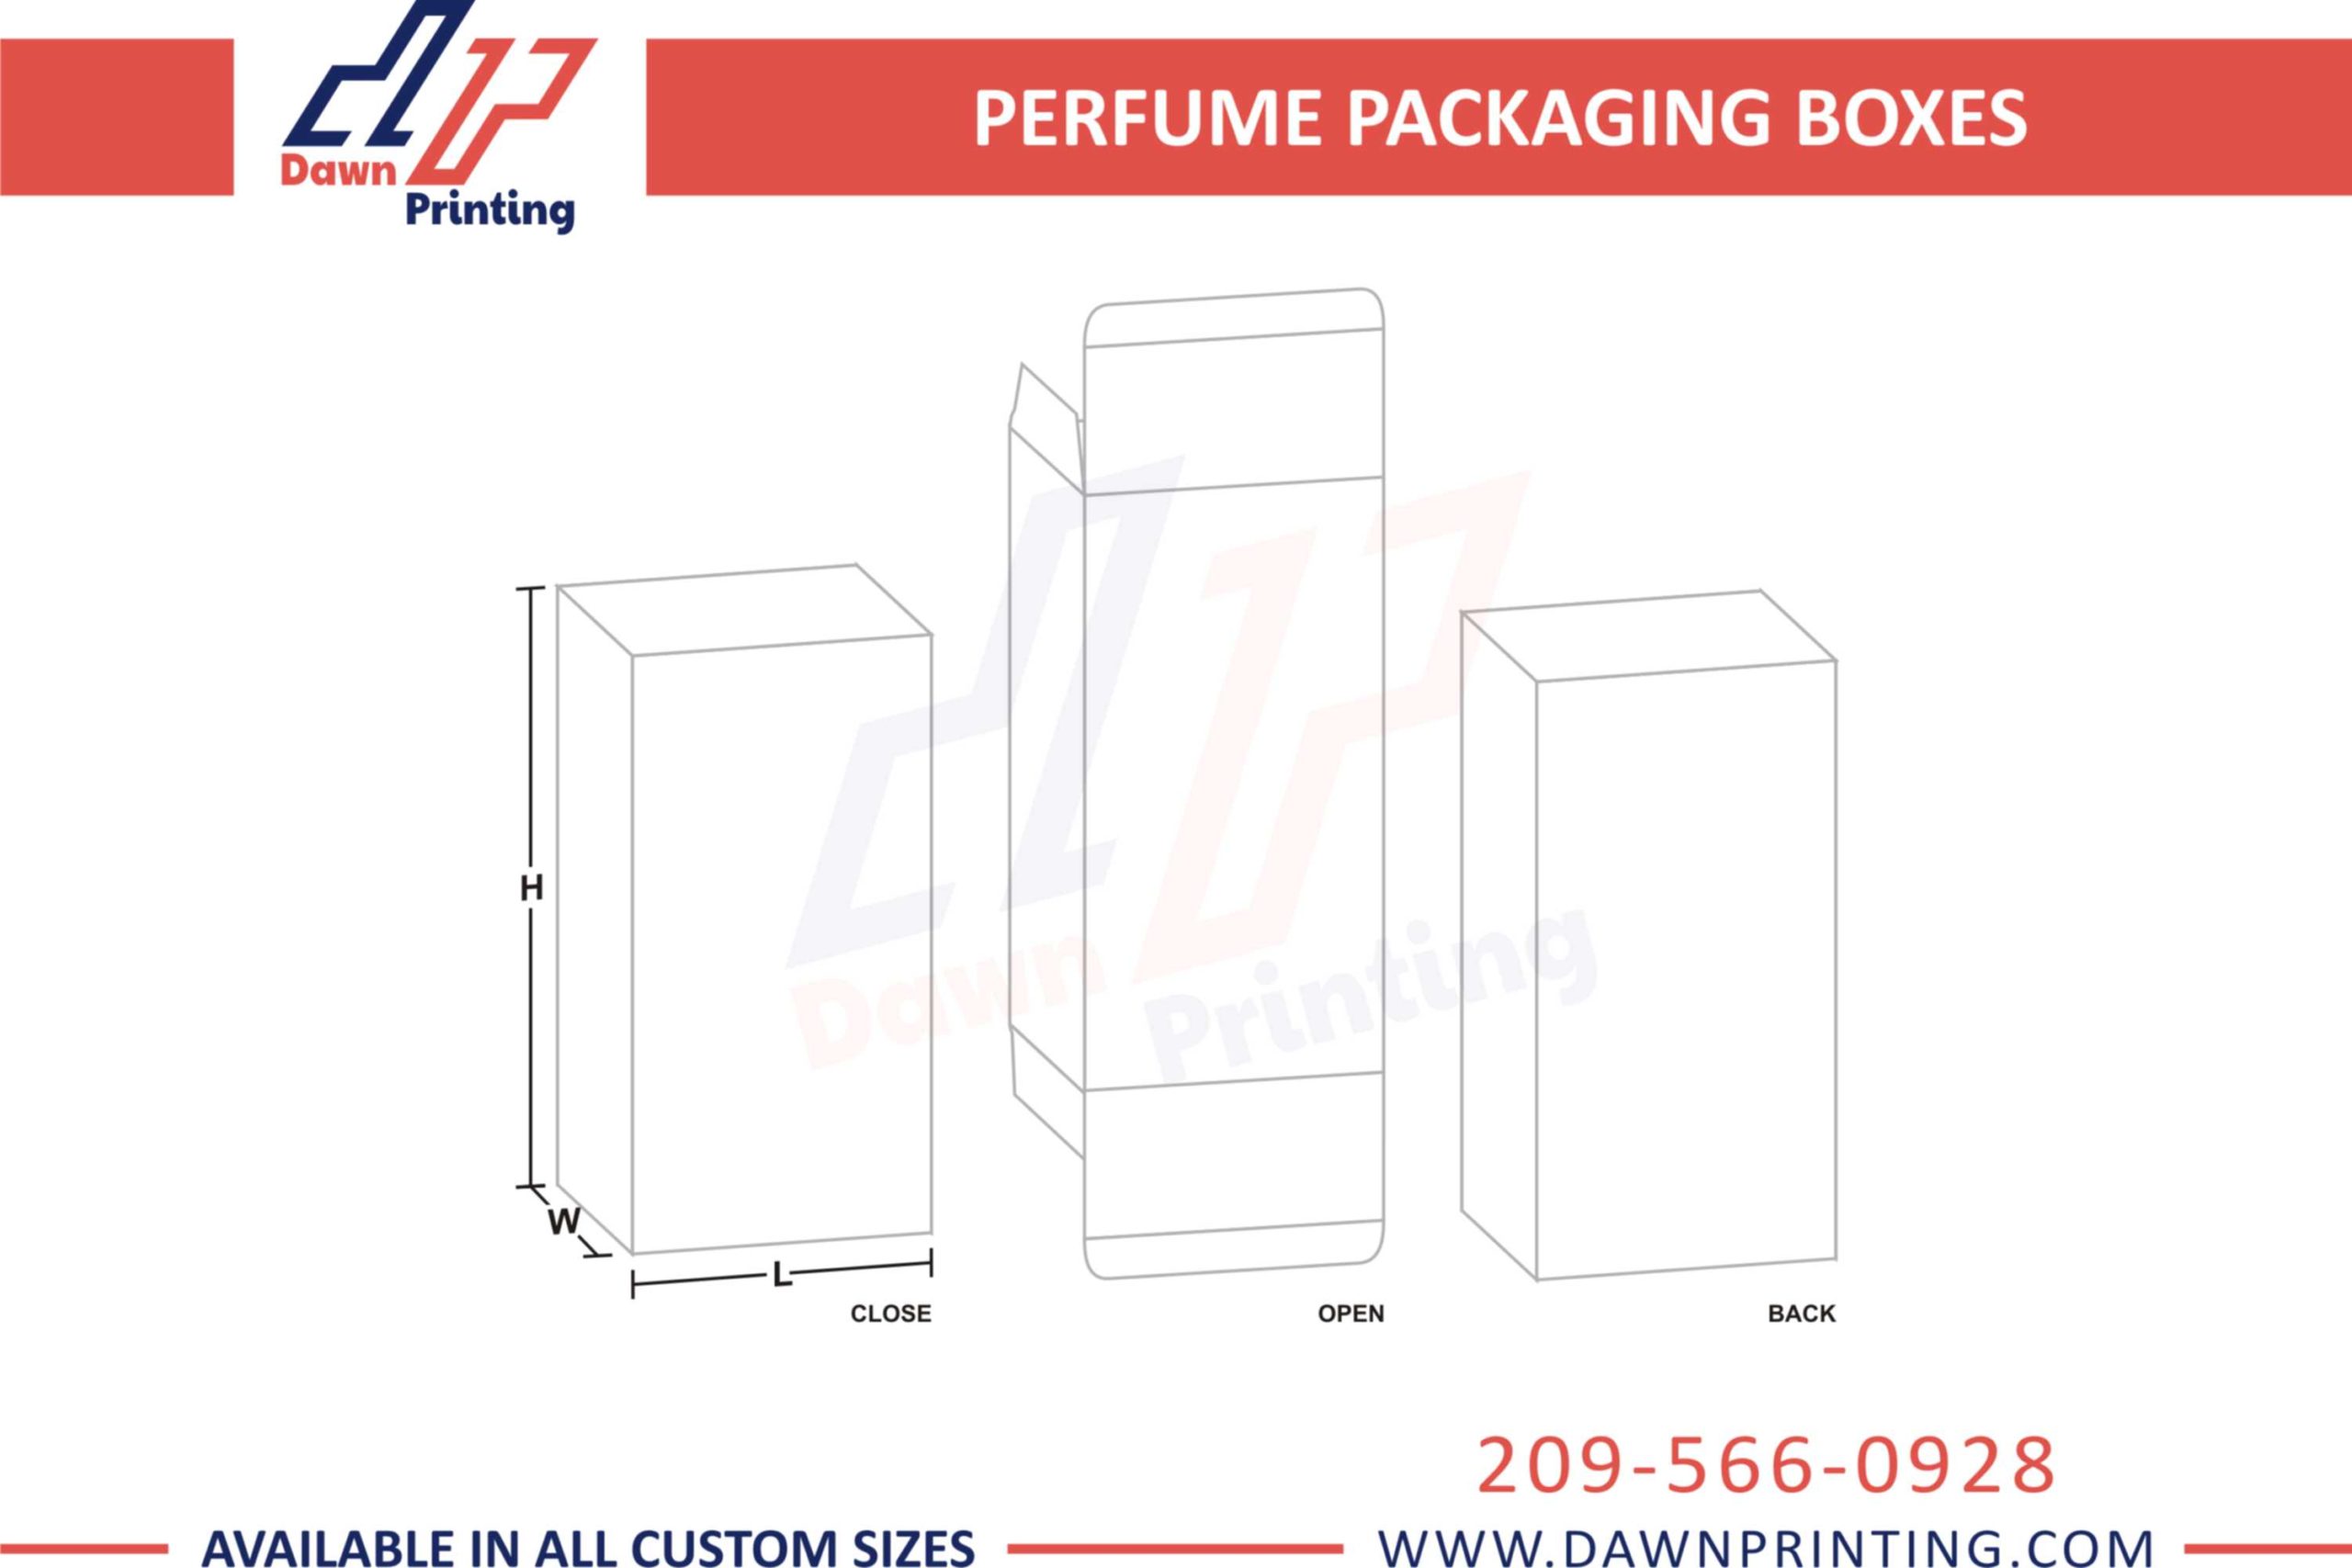 3D Customized Perfume Boxes Design Template - Dawn Printing